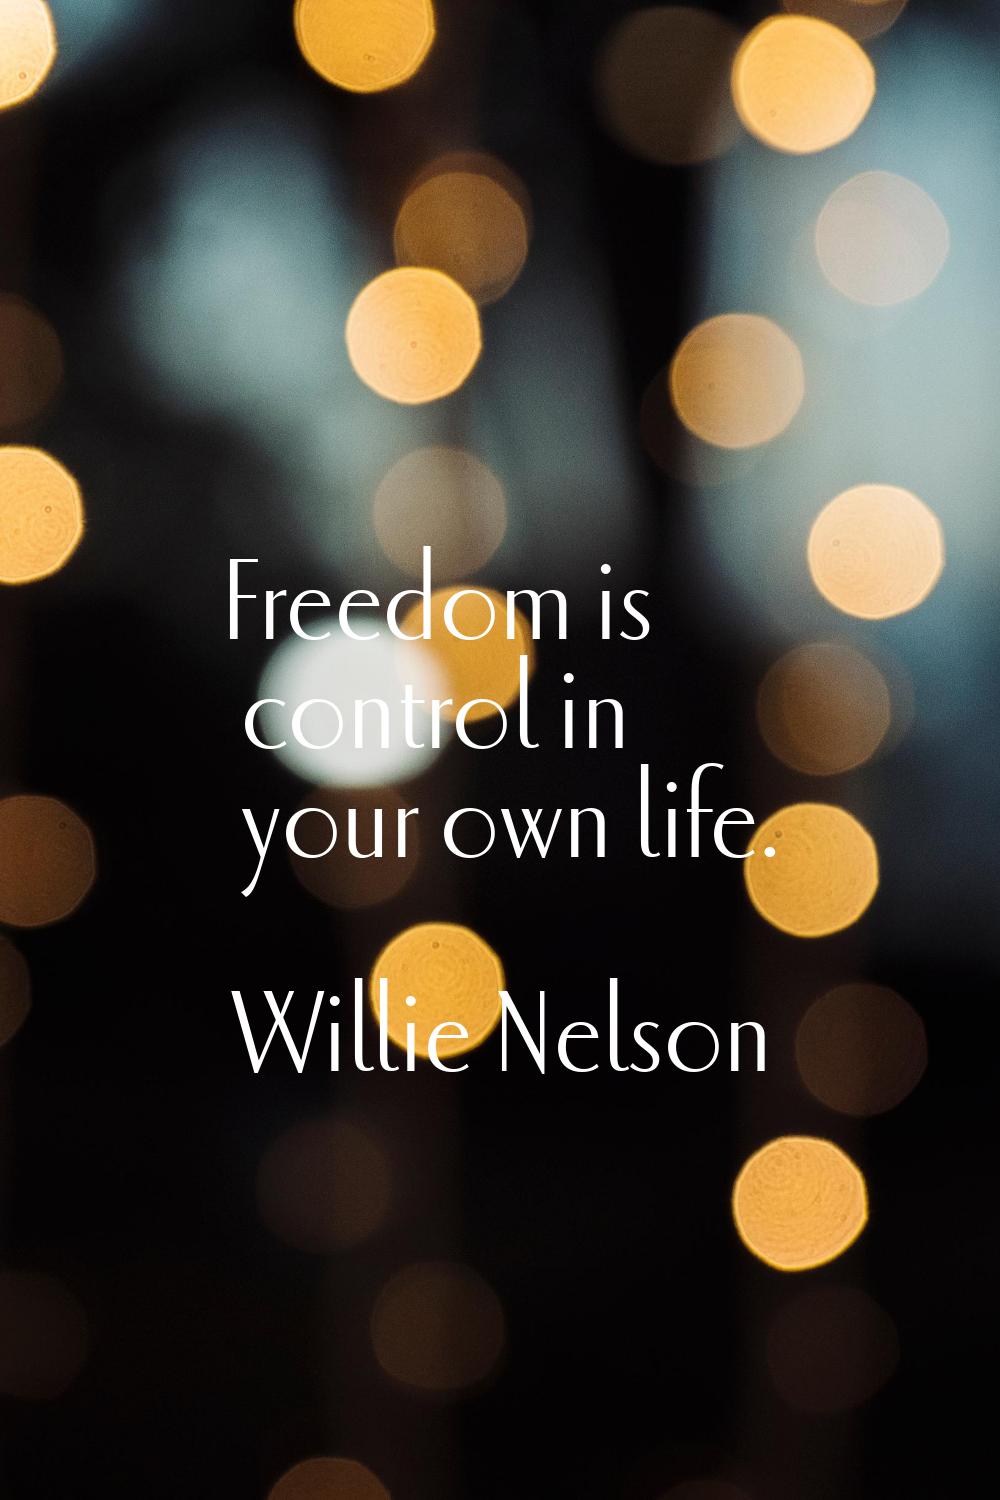 Freedom is control in your own life.